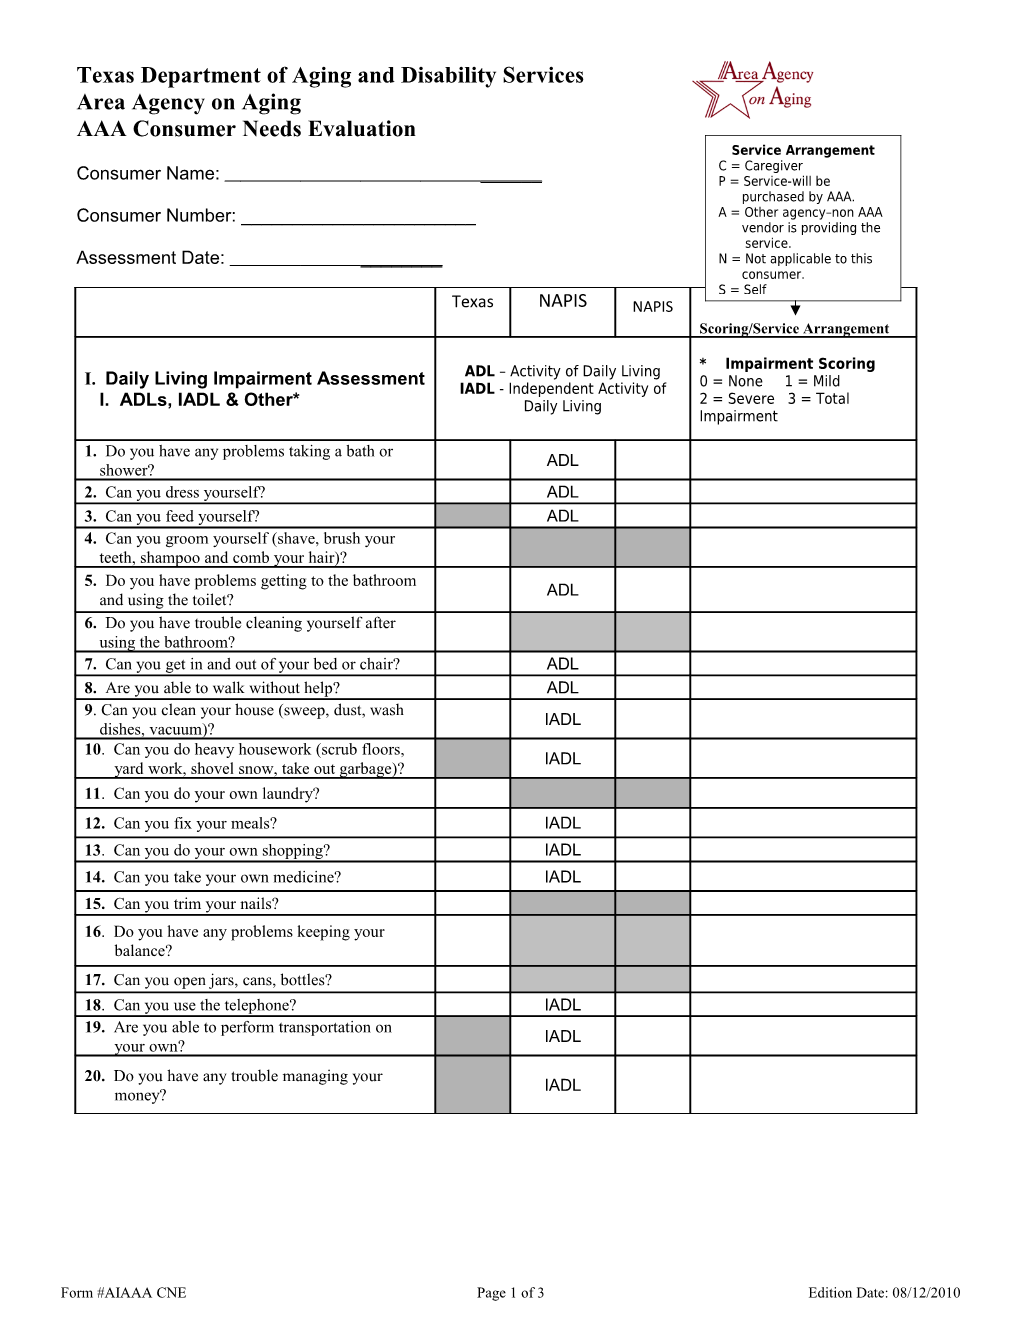 Form 2060, Consumer Needs Assessment Questionnaire and Task/Hour Guide s1